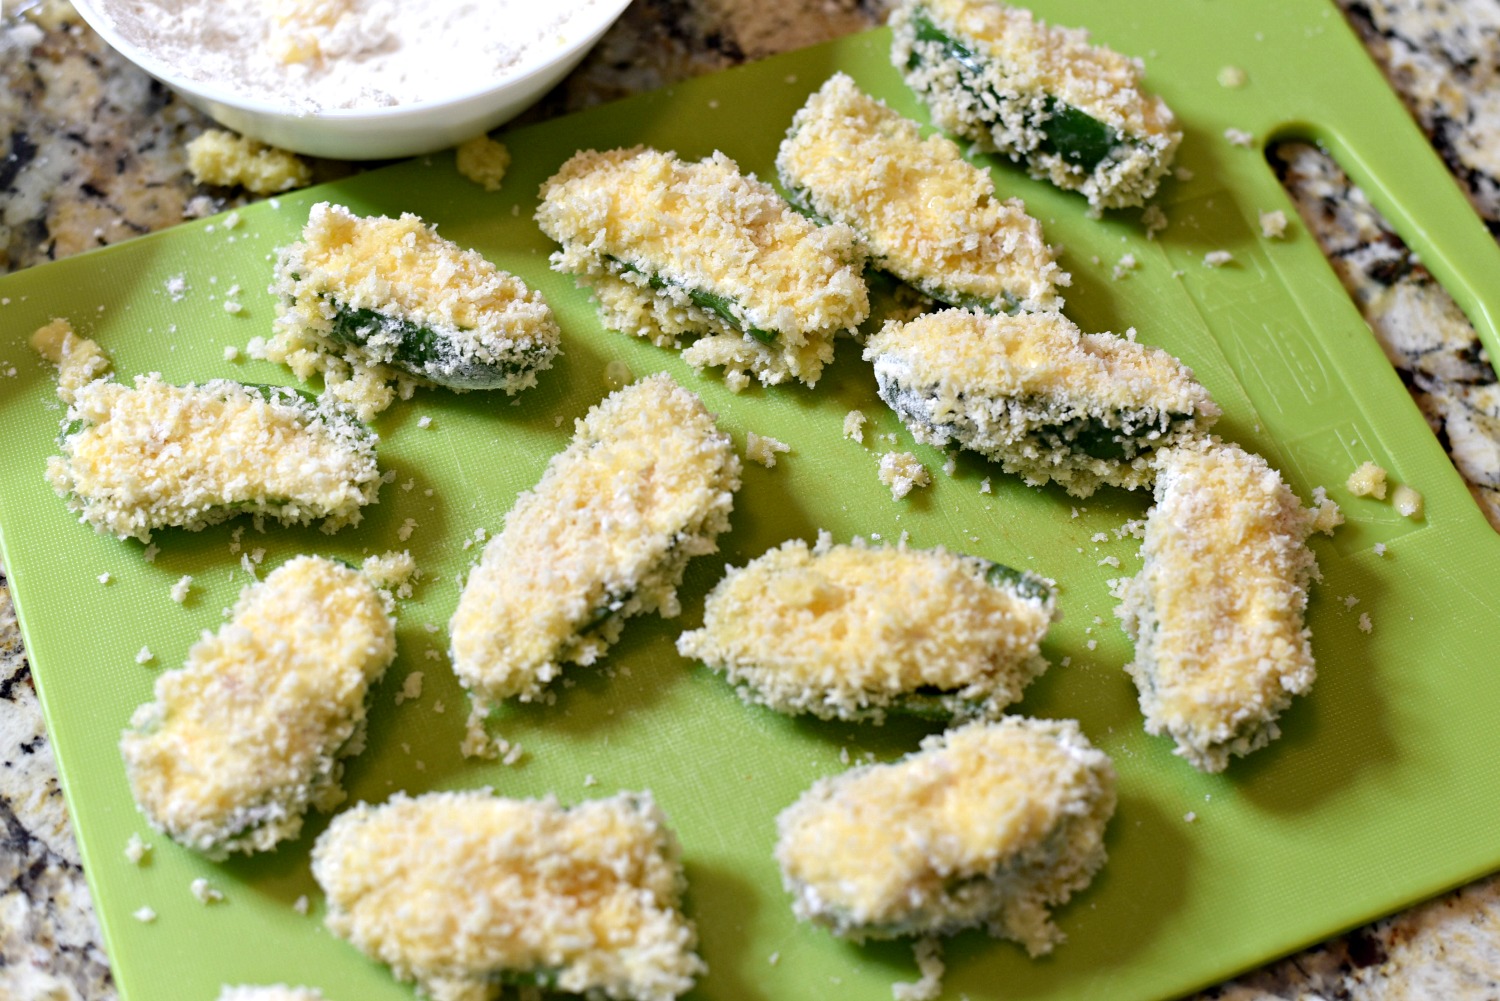 Looking for an easy appetizer? Try these Spicy Sweet Air Fryer Jalapeño Poppers! Ready in under 20 minutes, these crispy small bites are stuffed with cream cheese, cheddar, bacon, and jalapeño jelly.